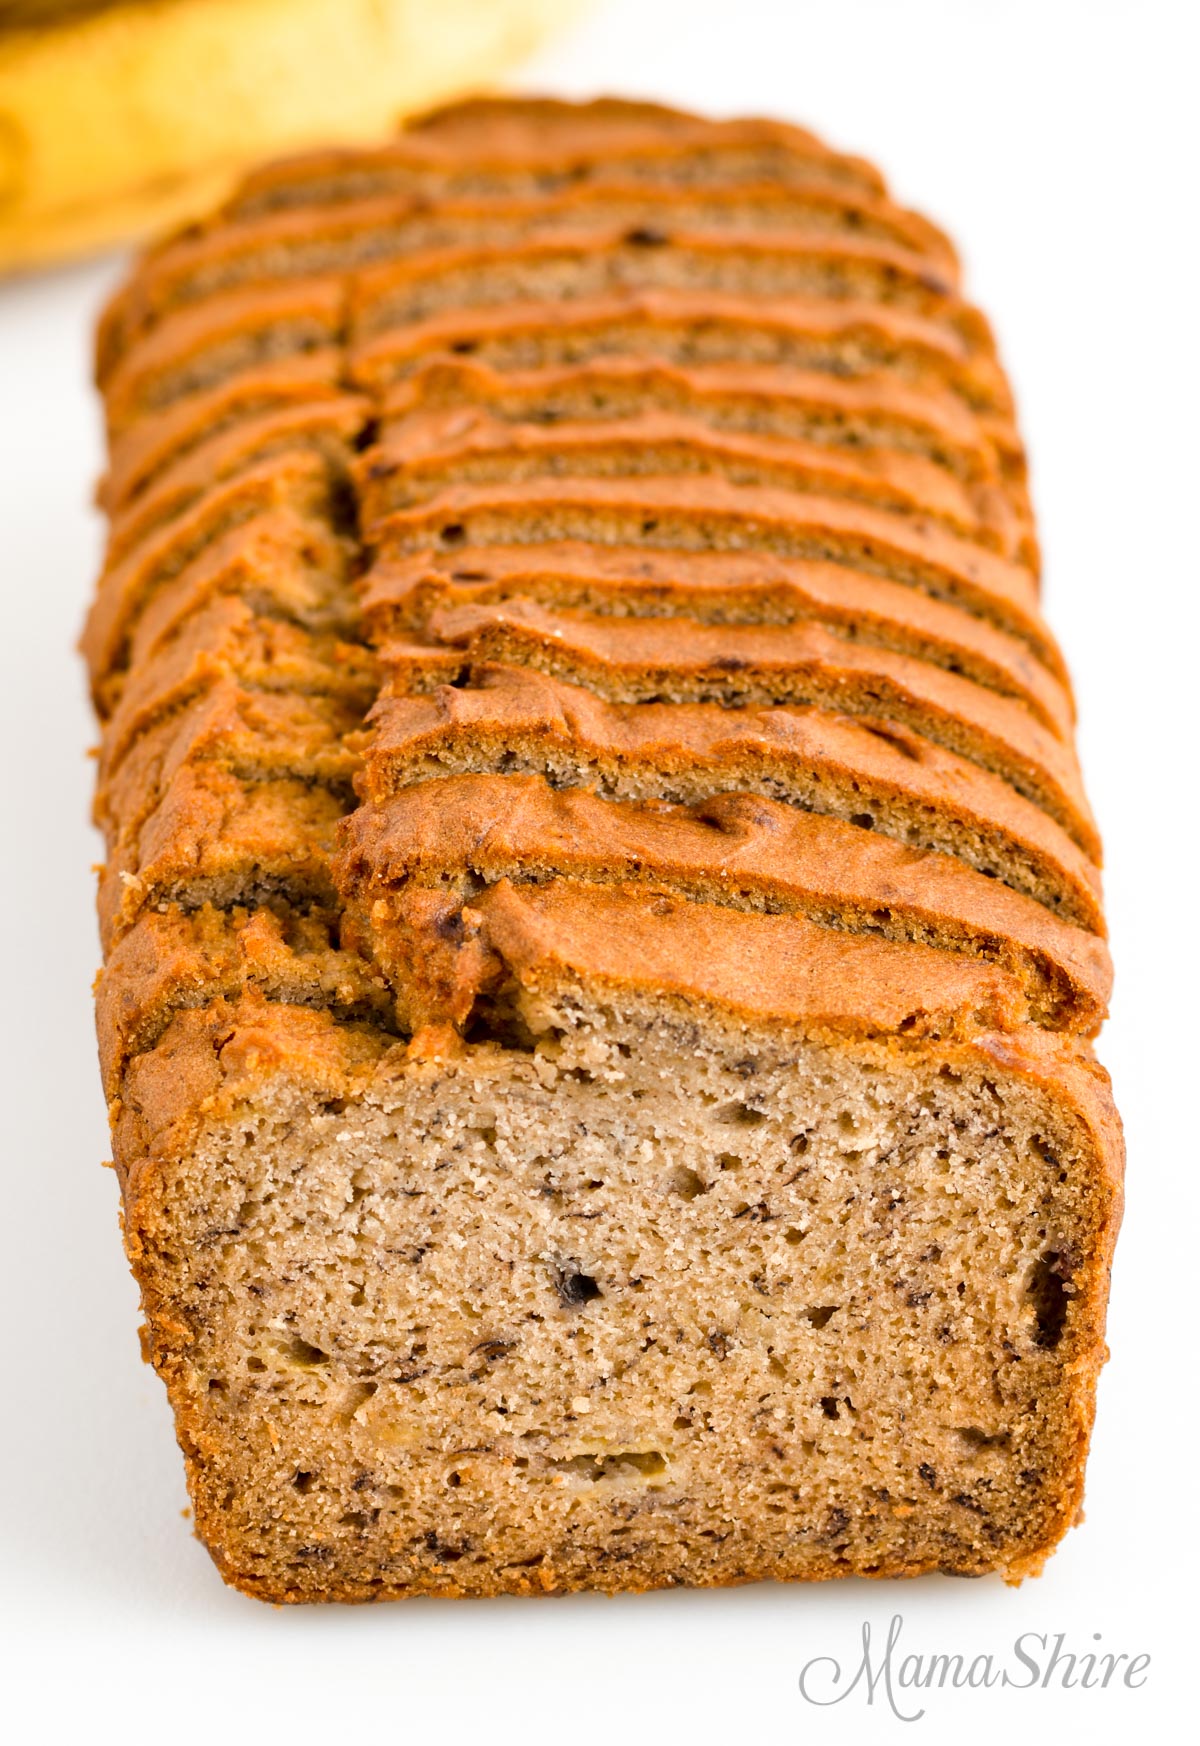 One loaf of banana bread made from a gluten-free recipe.